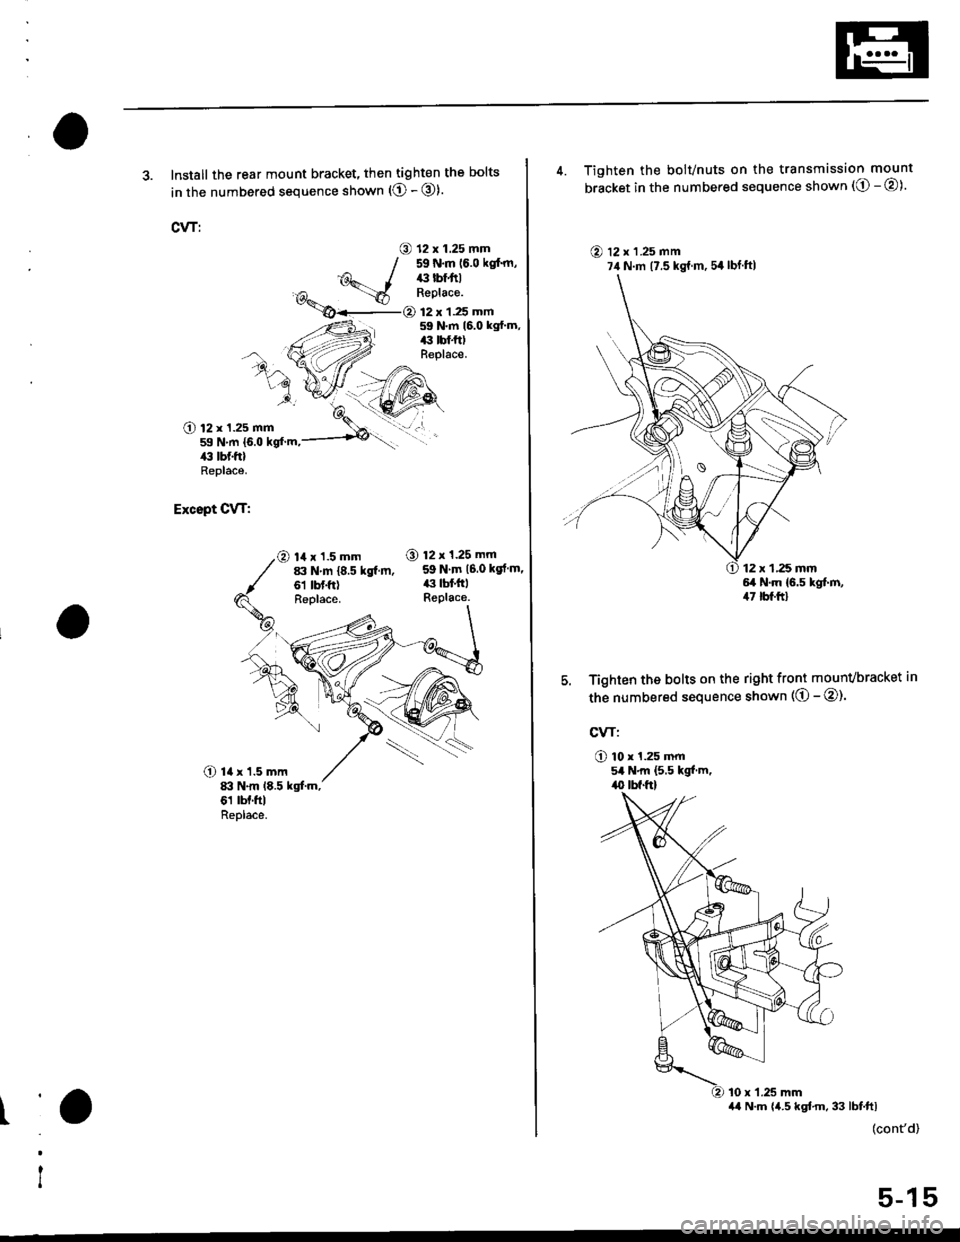 HONDA CIVIC 1996 6.G Workshop Manual 3. Install the rear mount bracket, then tighten the bolts
in the numbered sequence shown (O - @).
CVT:
O 12 x 1.25 mm59 N.m (6.0 kglm,ilil lbf ftlReplace.
12 x 1.25 mm59 N.m 16.0 kgfm,|:r tbf.tt)Rep